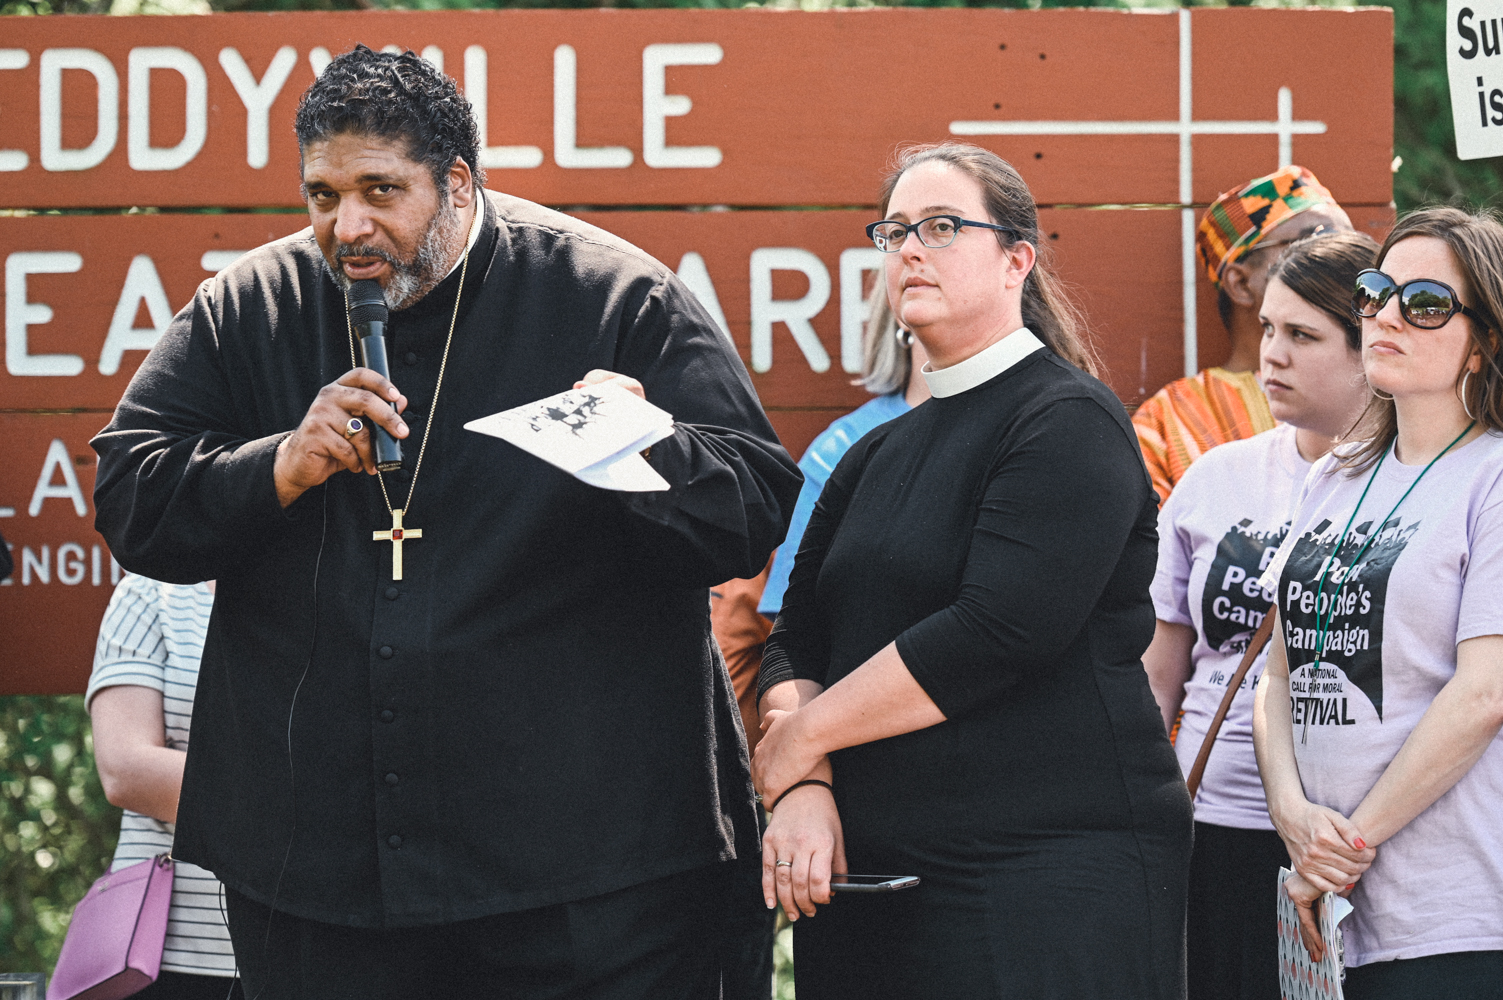 The Rev. Dr. William Barber and Rev. Dr. Liz Theoharis, co-chairs of the Poor People's Campaign: A National Call for Moral Revival, spoke at the Kentucky State Penitentiary in Eddyville, Kentucky as part of the Campaign's Real National Emergency Bus Tour on April 29, 2019. —(Rich Copley | Presbyterian News Service)